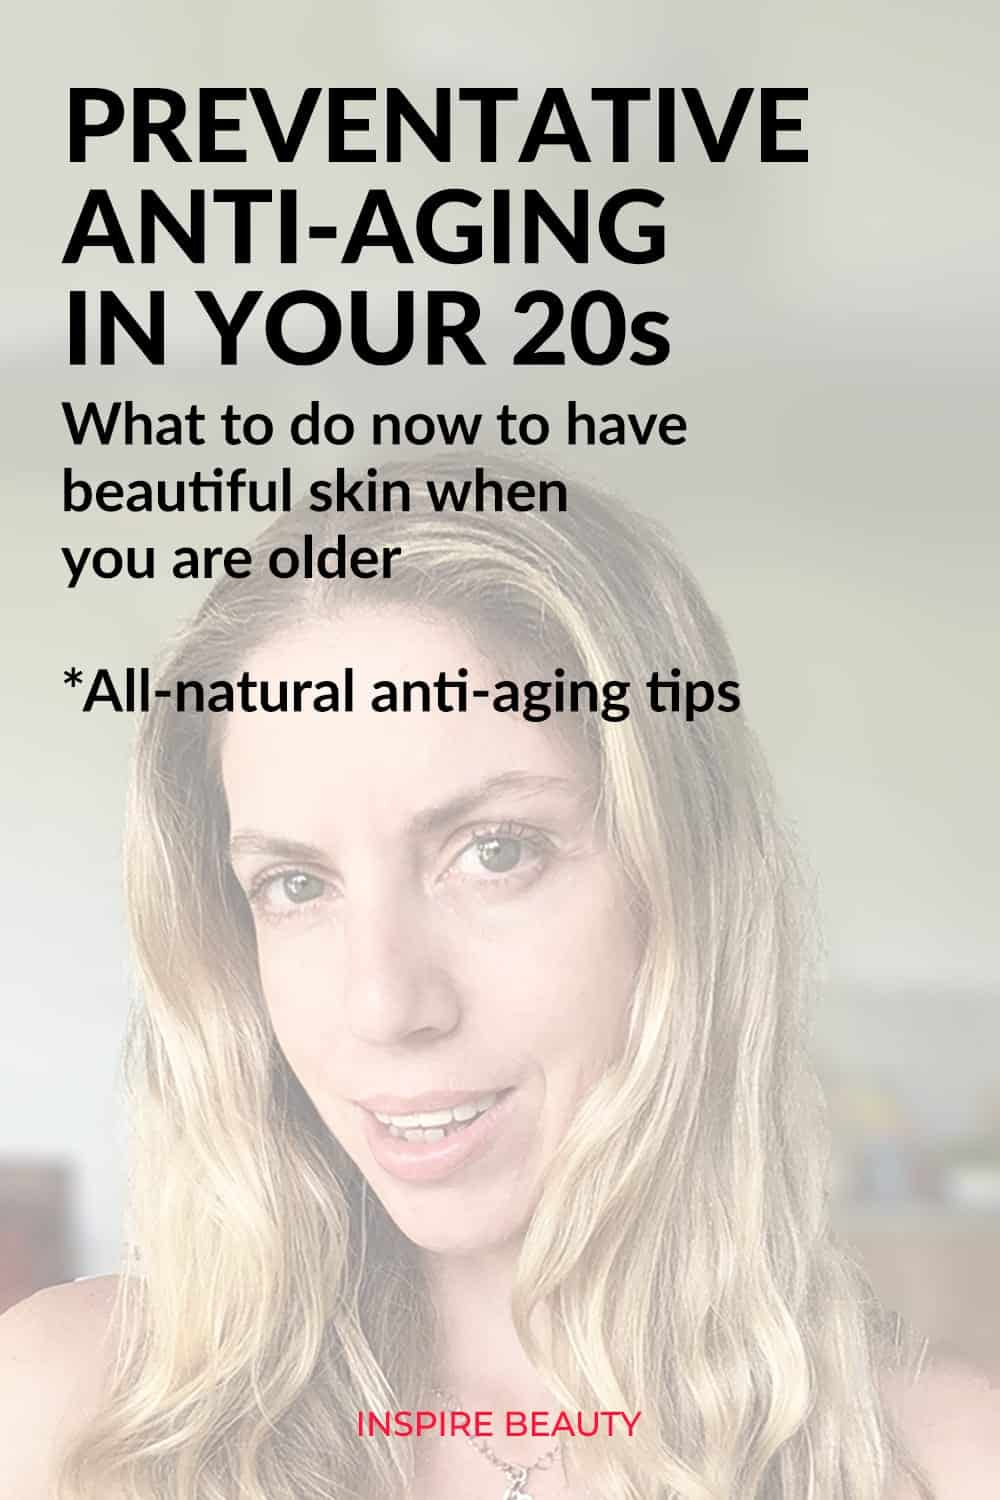 Preventative anti-aging in your 20s, all natural anti-aging tips on how to have great skin as you get older.